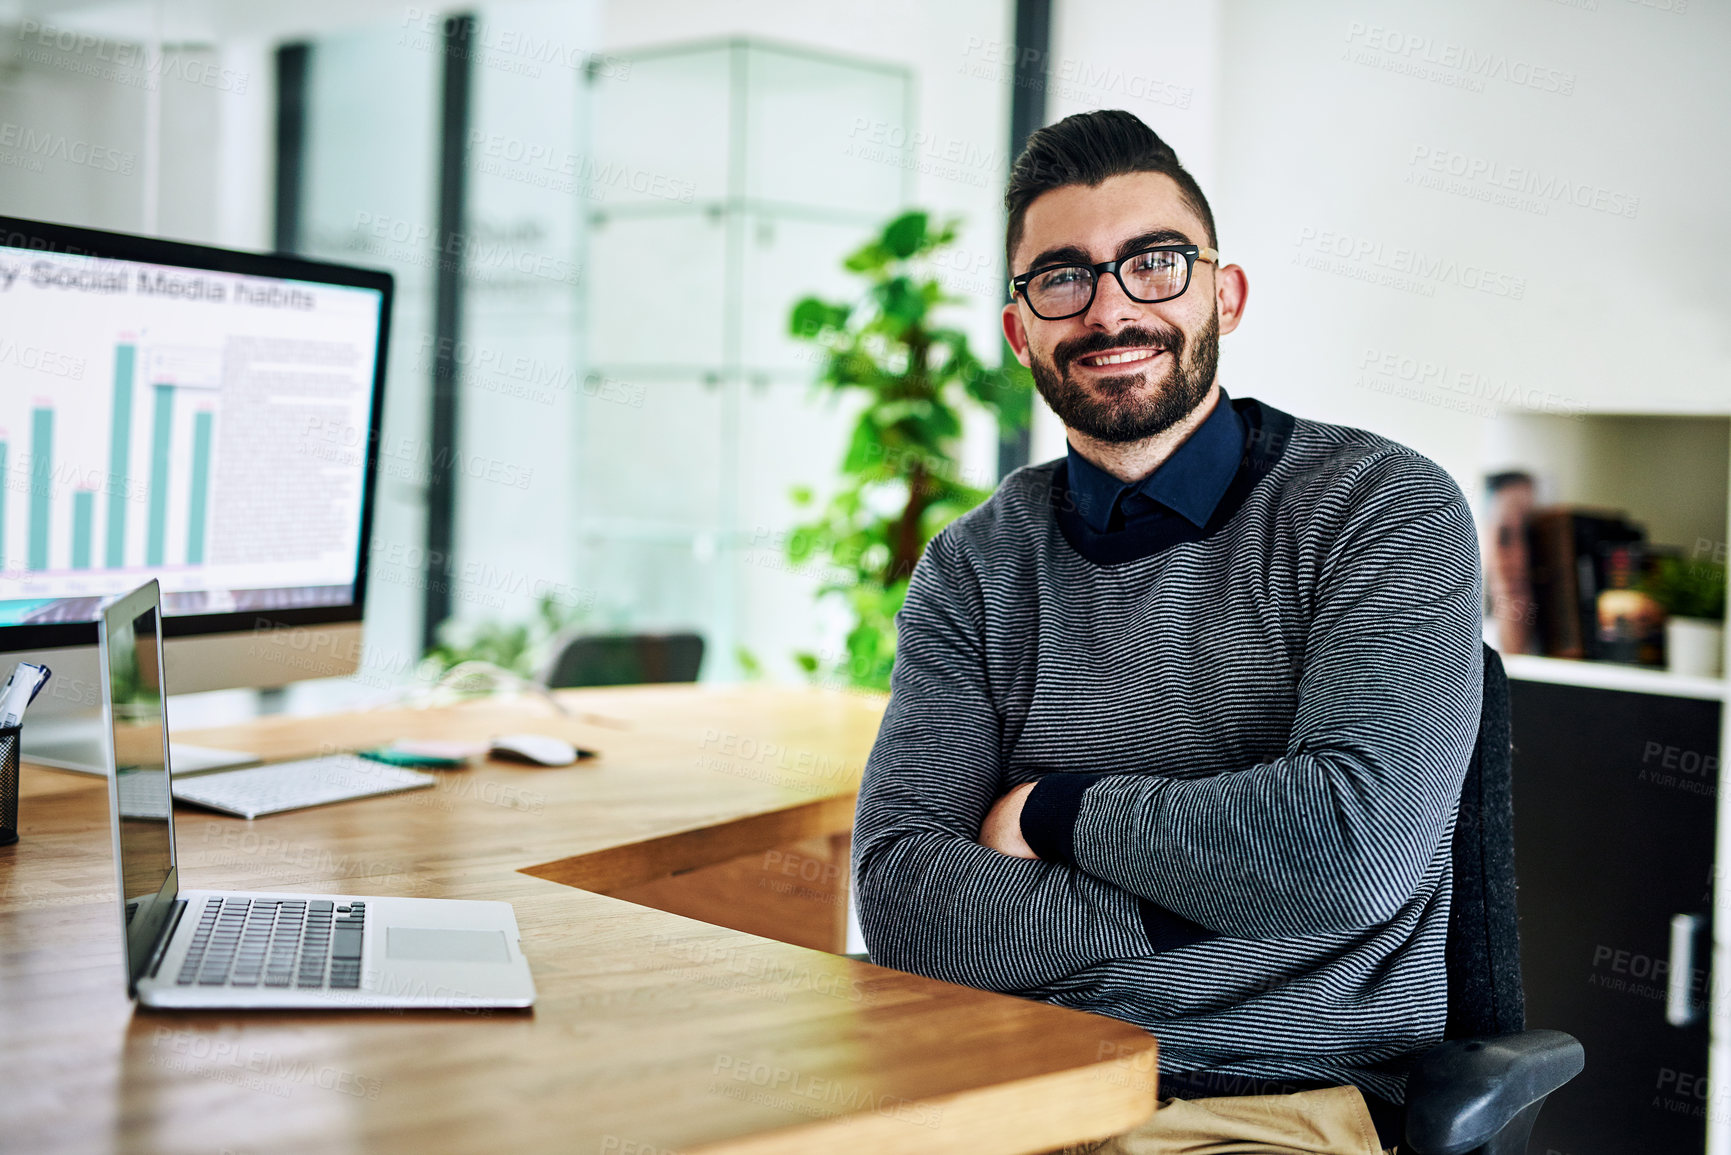 Buy stock photo Portrait of a confident young designer sitting at his desk in an office